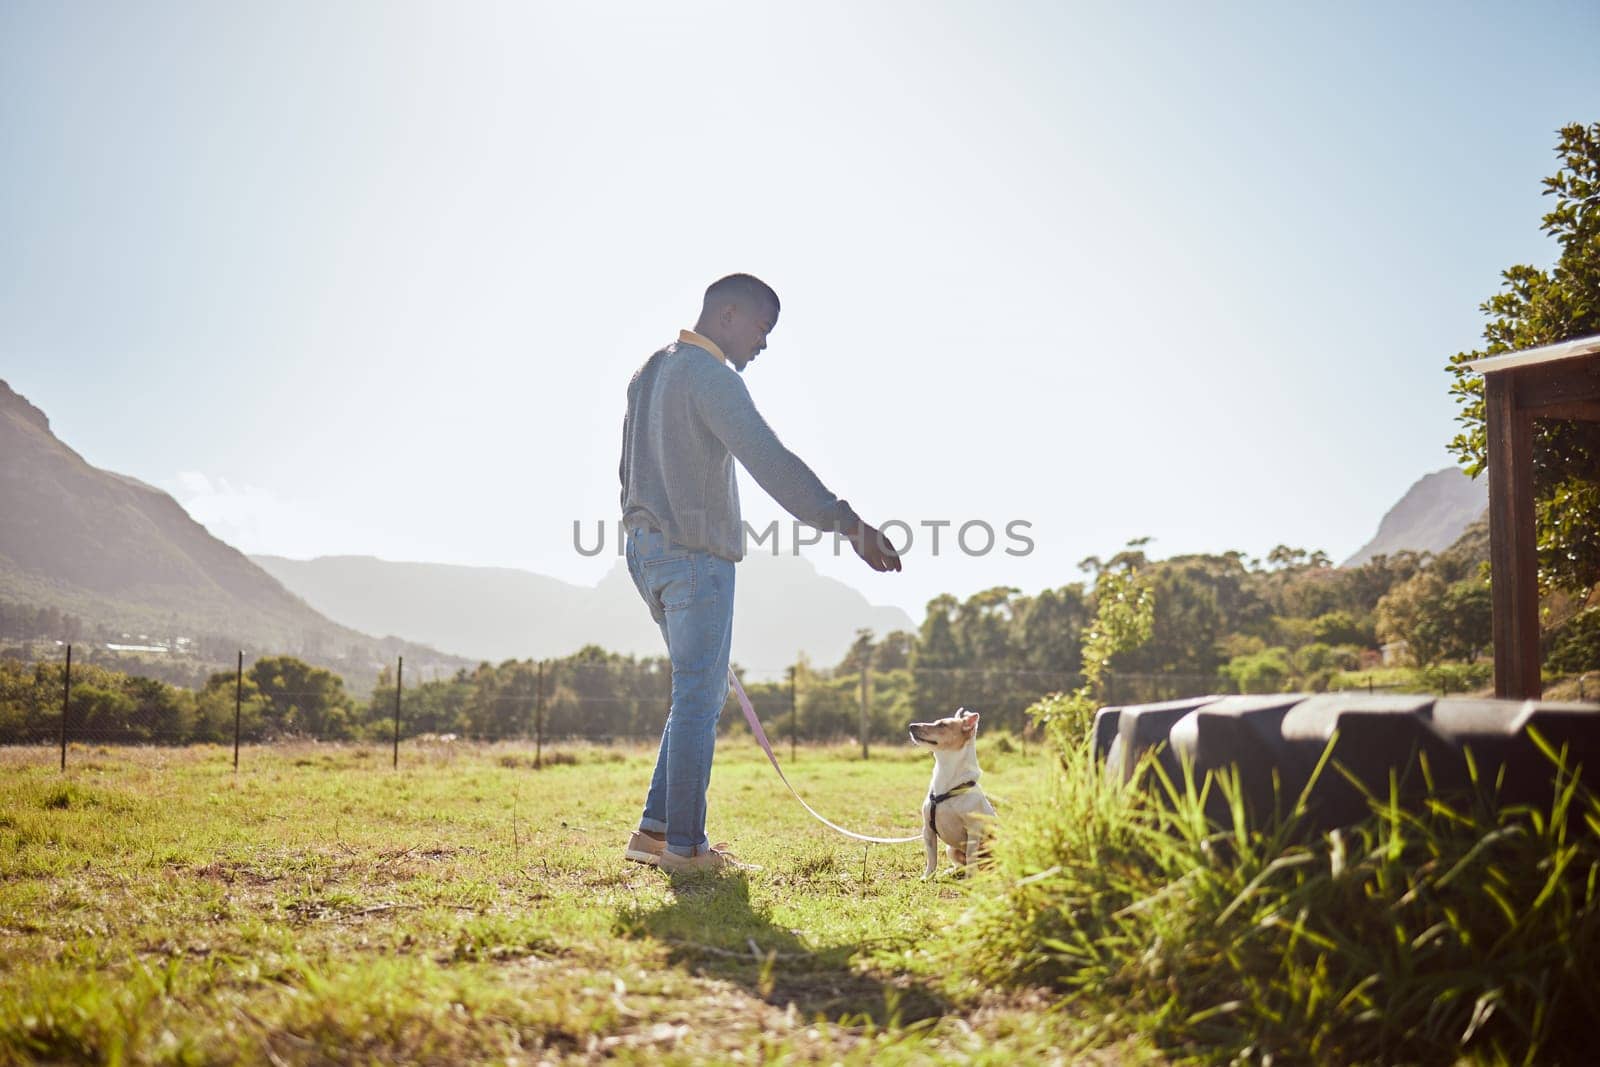 Man training dog pets at park, garden and outdoors on a leash with sky background. Black man walking a jack russell terrier puppy animal and learning trick, command or play on grass field in nature by YuriArcurs